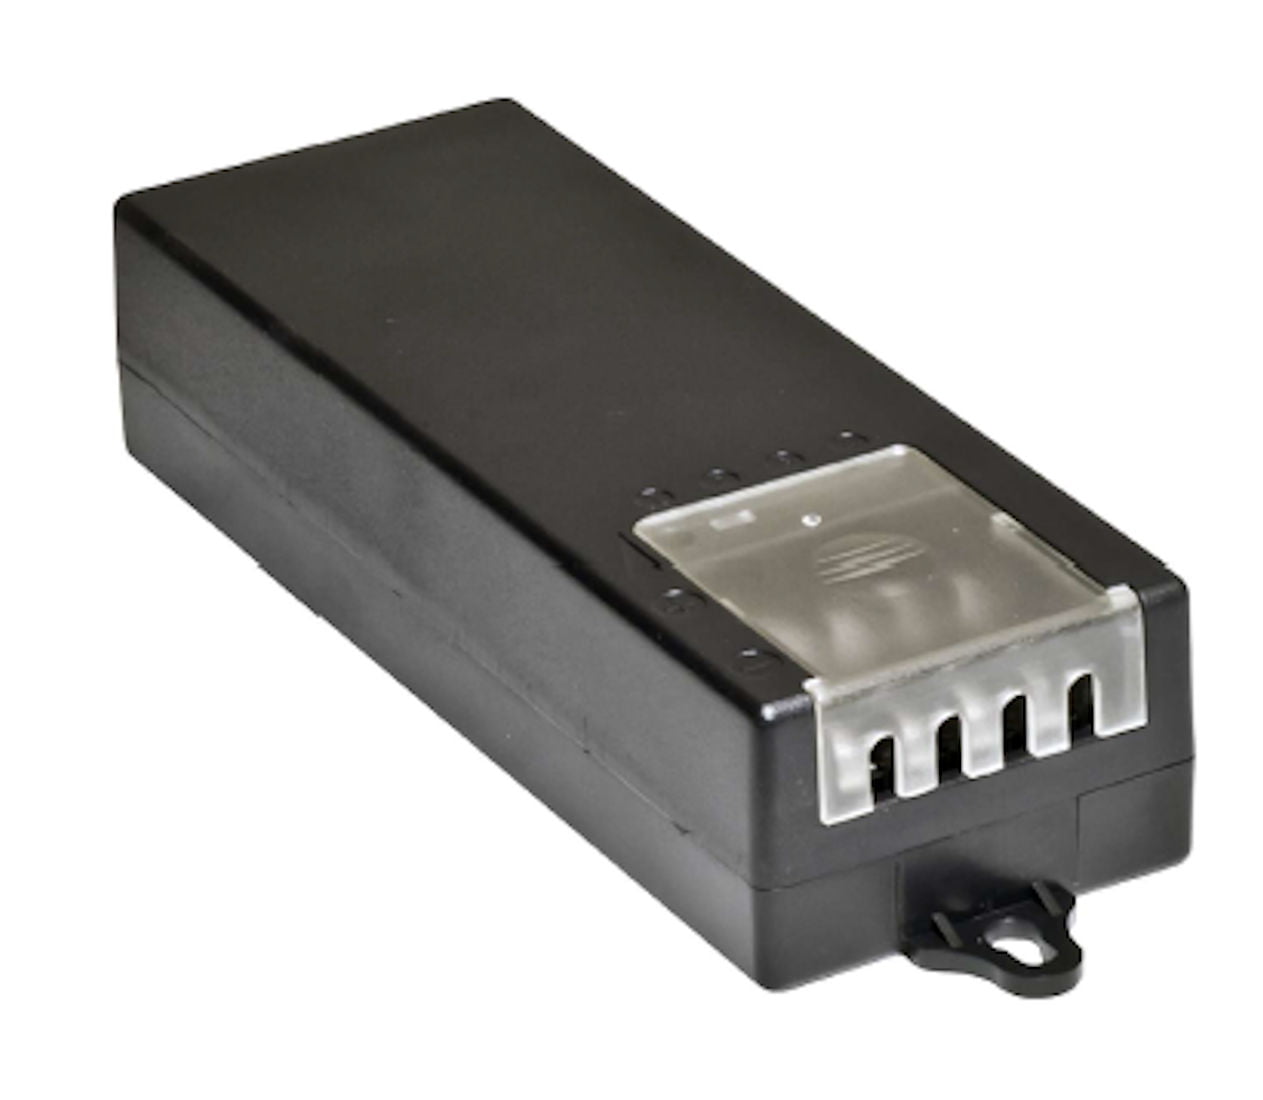 TR-DC441 DC 12V 4 CHANNEL POWER ADAPTER UL LISTED Side View